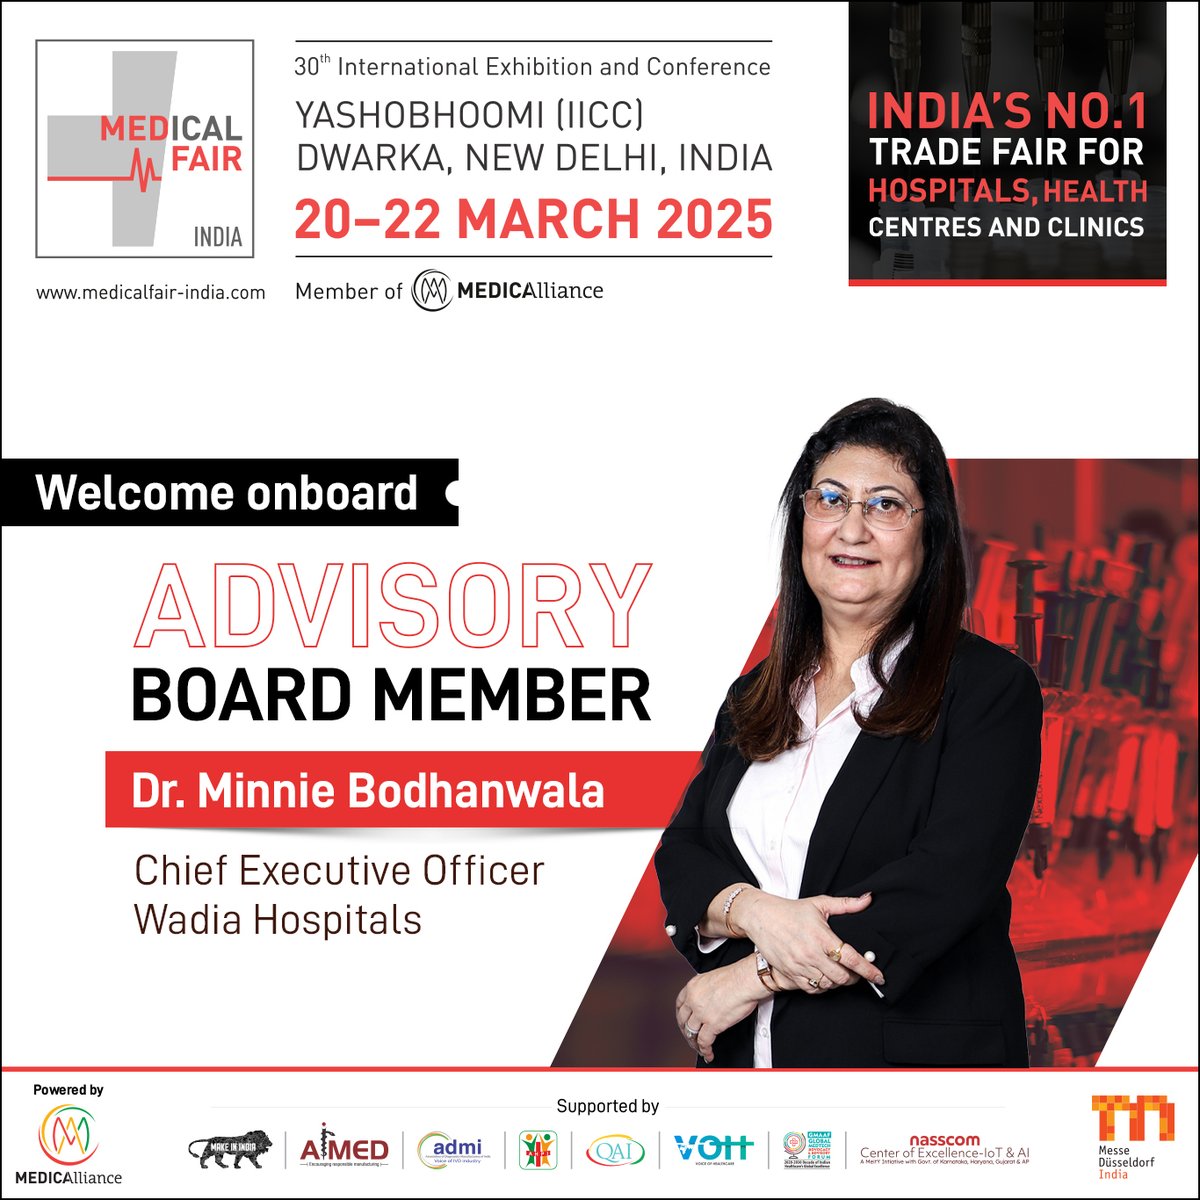 Welcome onboard!! We are delighted to welcome Dr Minnie Bodhanwala, CEO-Wadia Hospitals joining as Medical Fair India Advisory Committee member. The 30th edition of Medical Fair India is scheduled from 20th to 22nd March 2025 at Yashobhoomi (IICC), Dwarka, New Delhi.